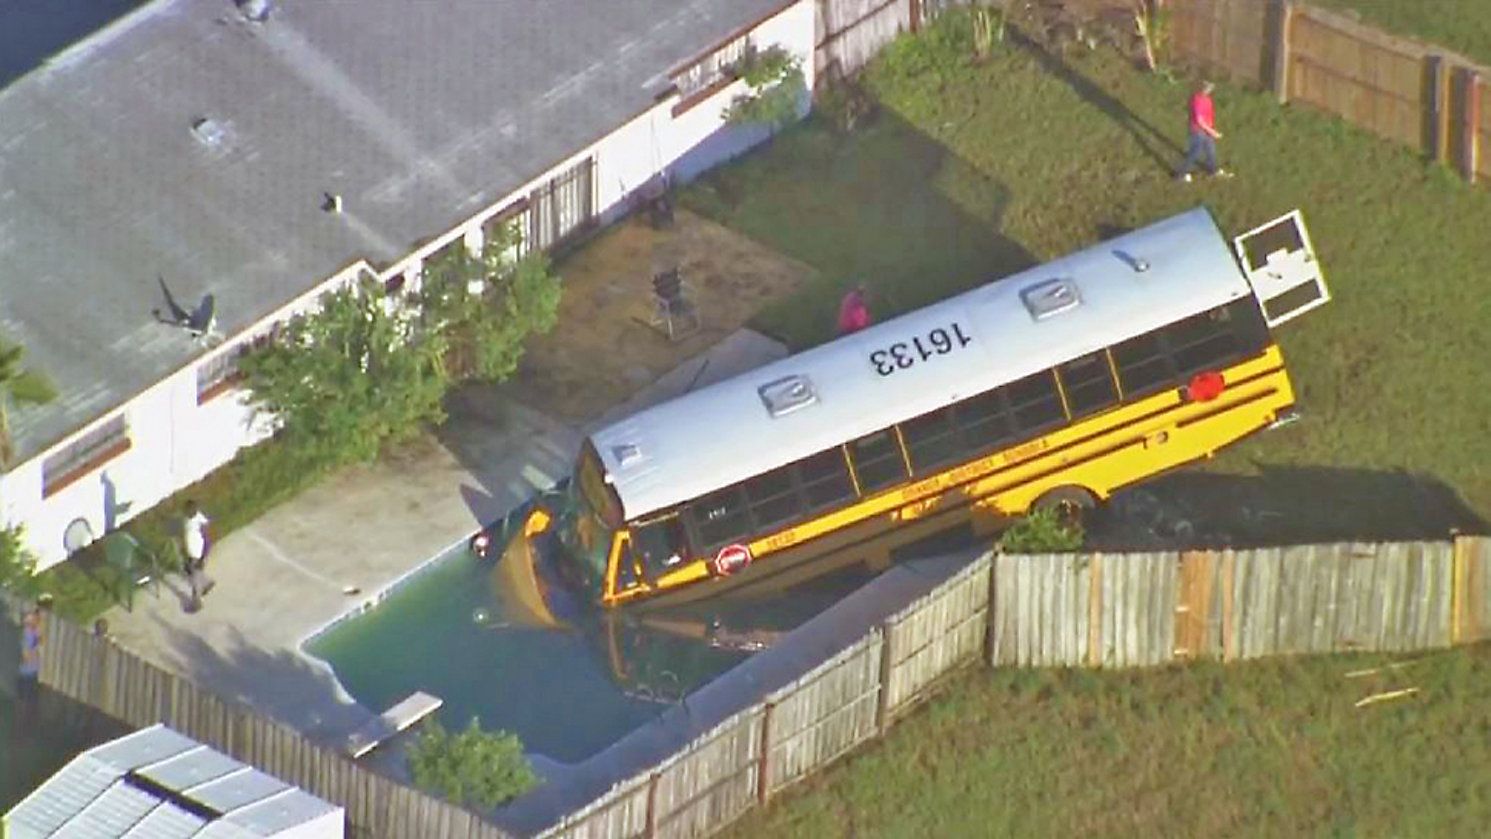 And here we see the wild school bus drinking from a pool.